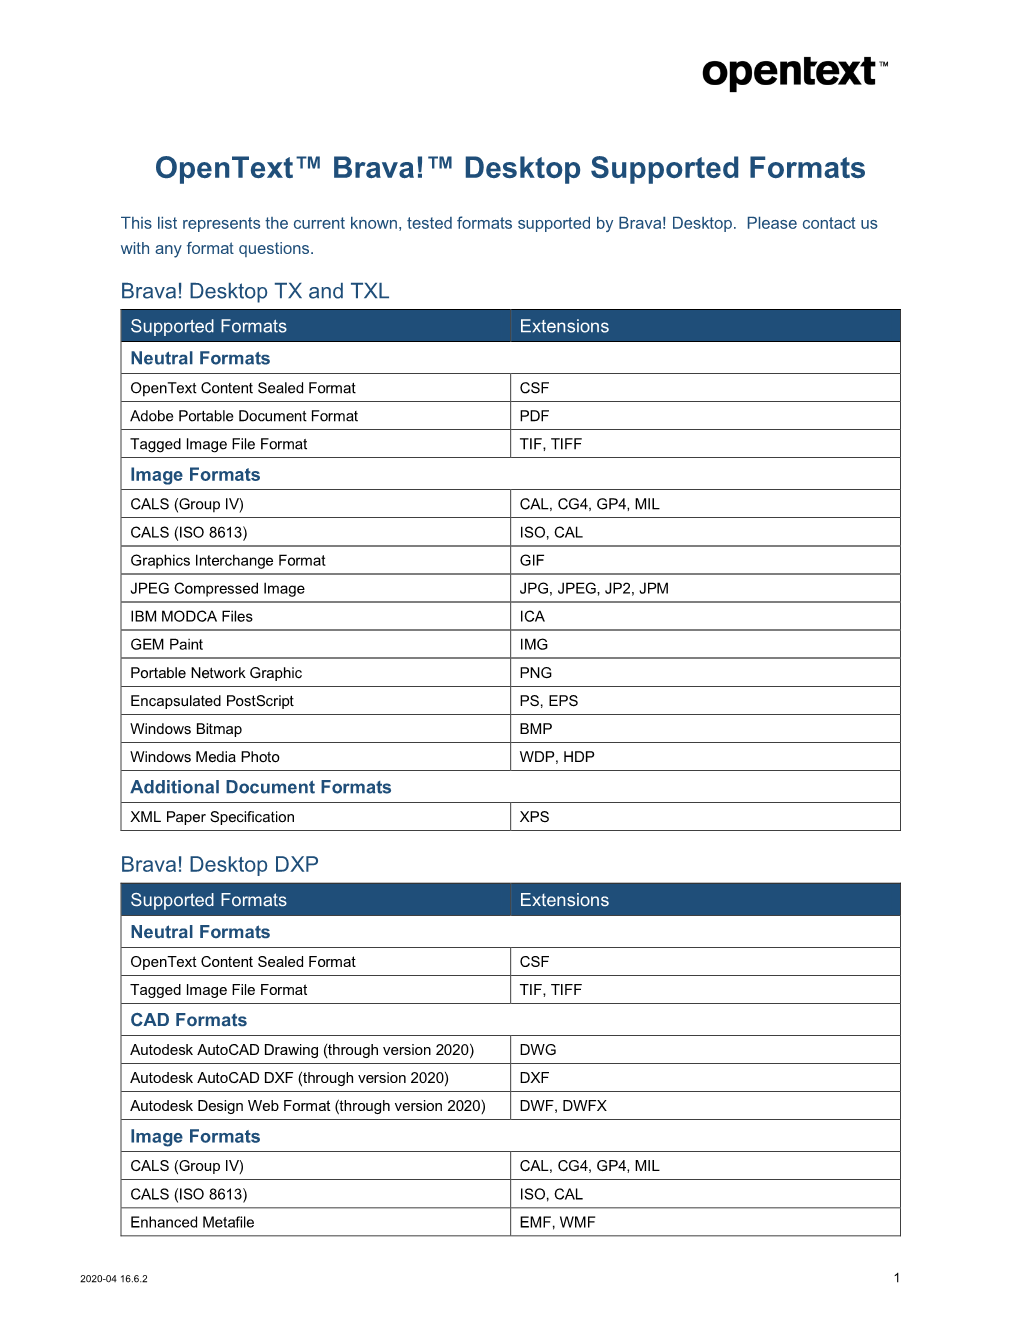 Opentext Brava! Desktop Supported Formats By